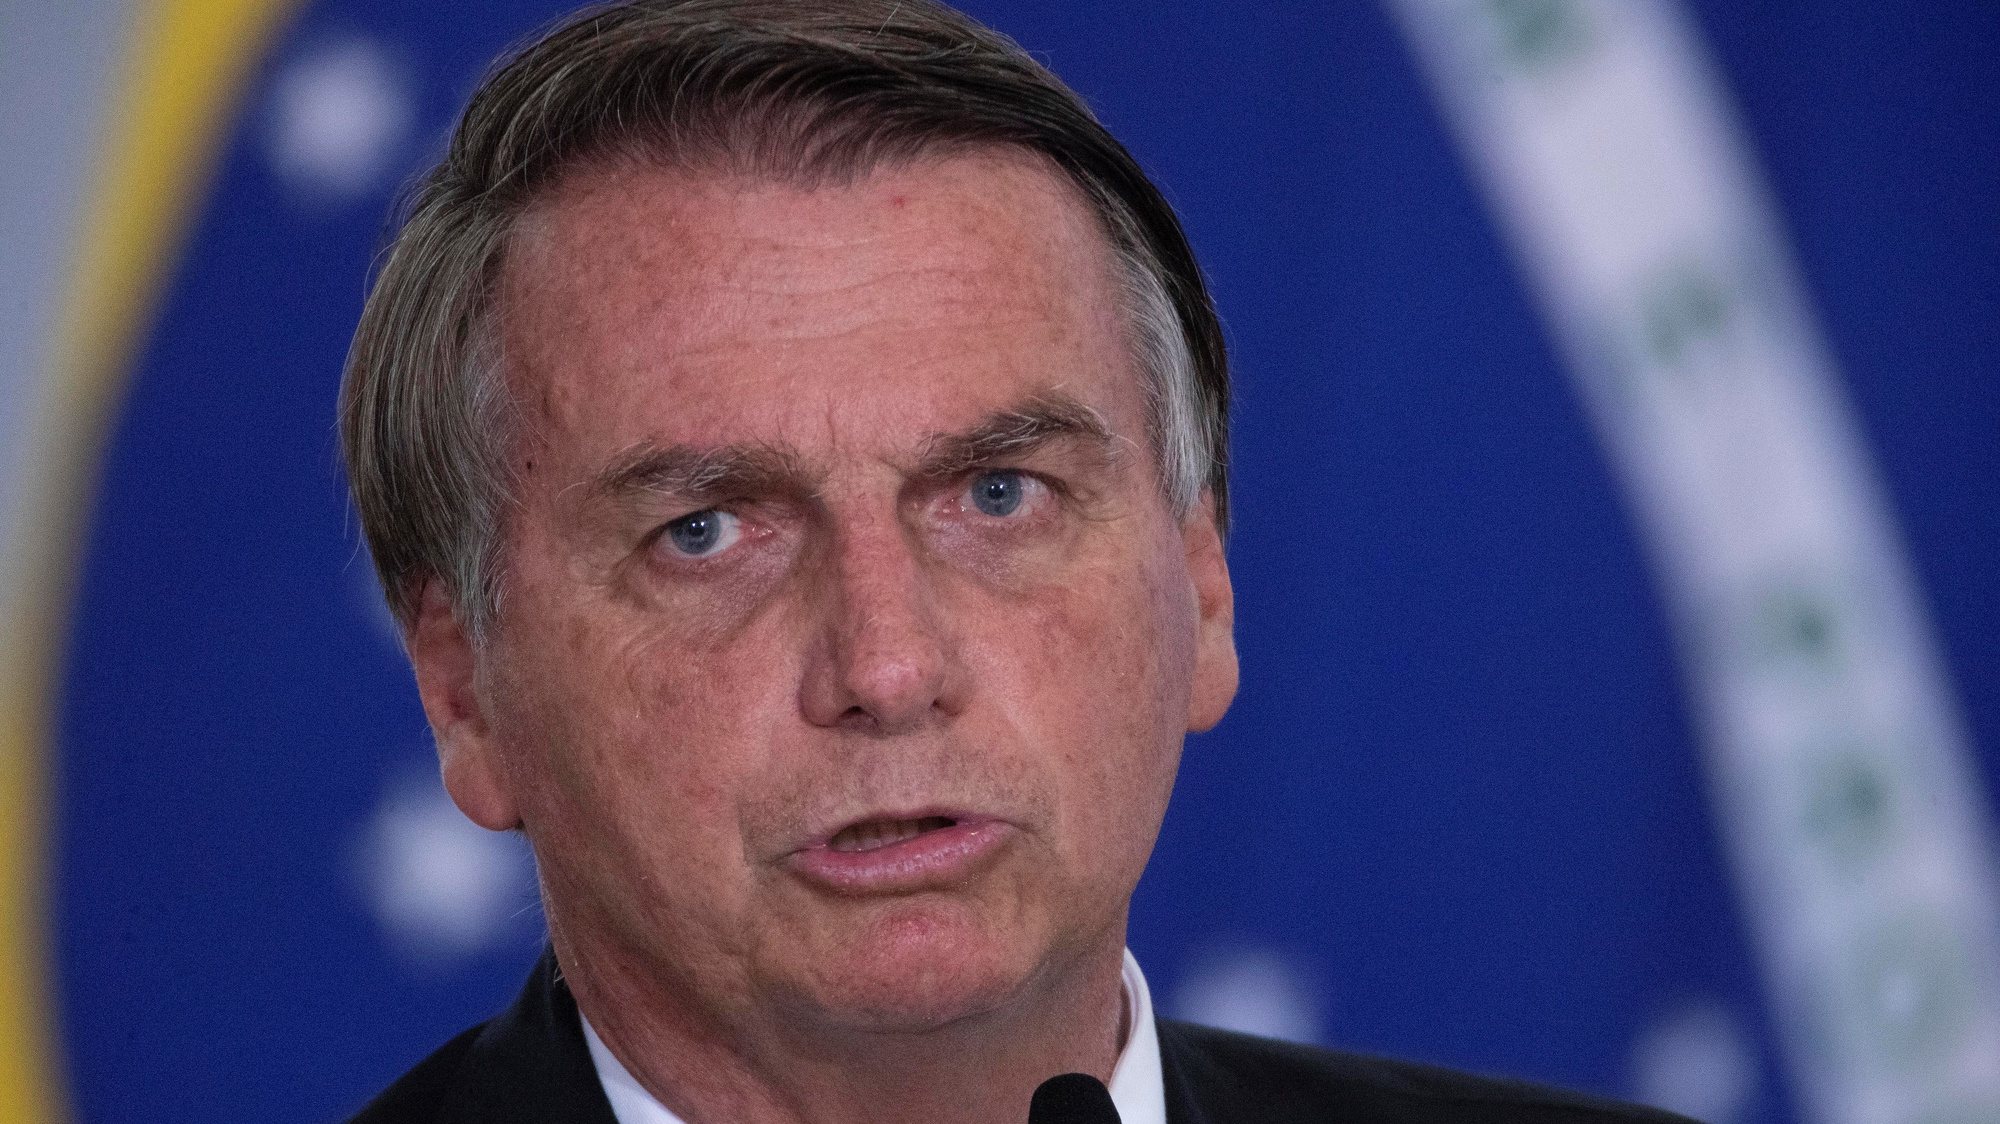 epa09617656 President of Brazil, Jair Bolsonaro, speaks during the signing of the Gas Aid decrees and the Alimenta Brasil program, at the Planalto Palace in Brasilia, Brazil, 02 December 2021. Bolsonaro reaffirmed that his government does not plan to implement the so-called &#039;health passport&#039; in the country, since &#039;freedom is above all&#039; and each citizen can decide whether to vaccinate or not. The adoption of the &#039;health passport&#039; has been demanded by various sectors, after the first cases of the omicron variant of covid-19 were verified in the country.  EPA/Joedson Alves